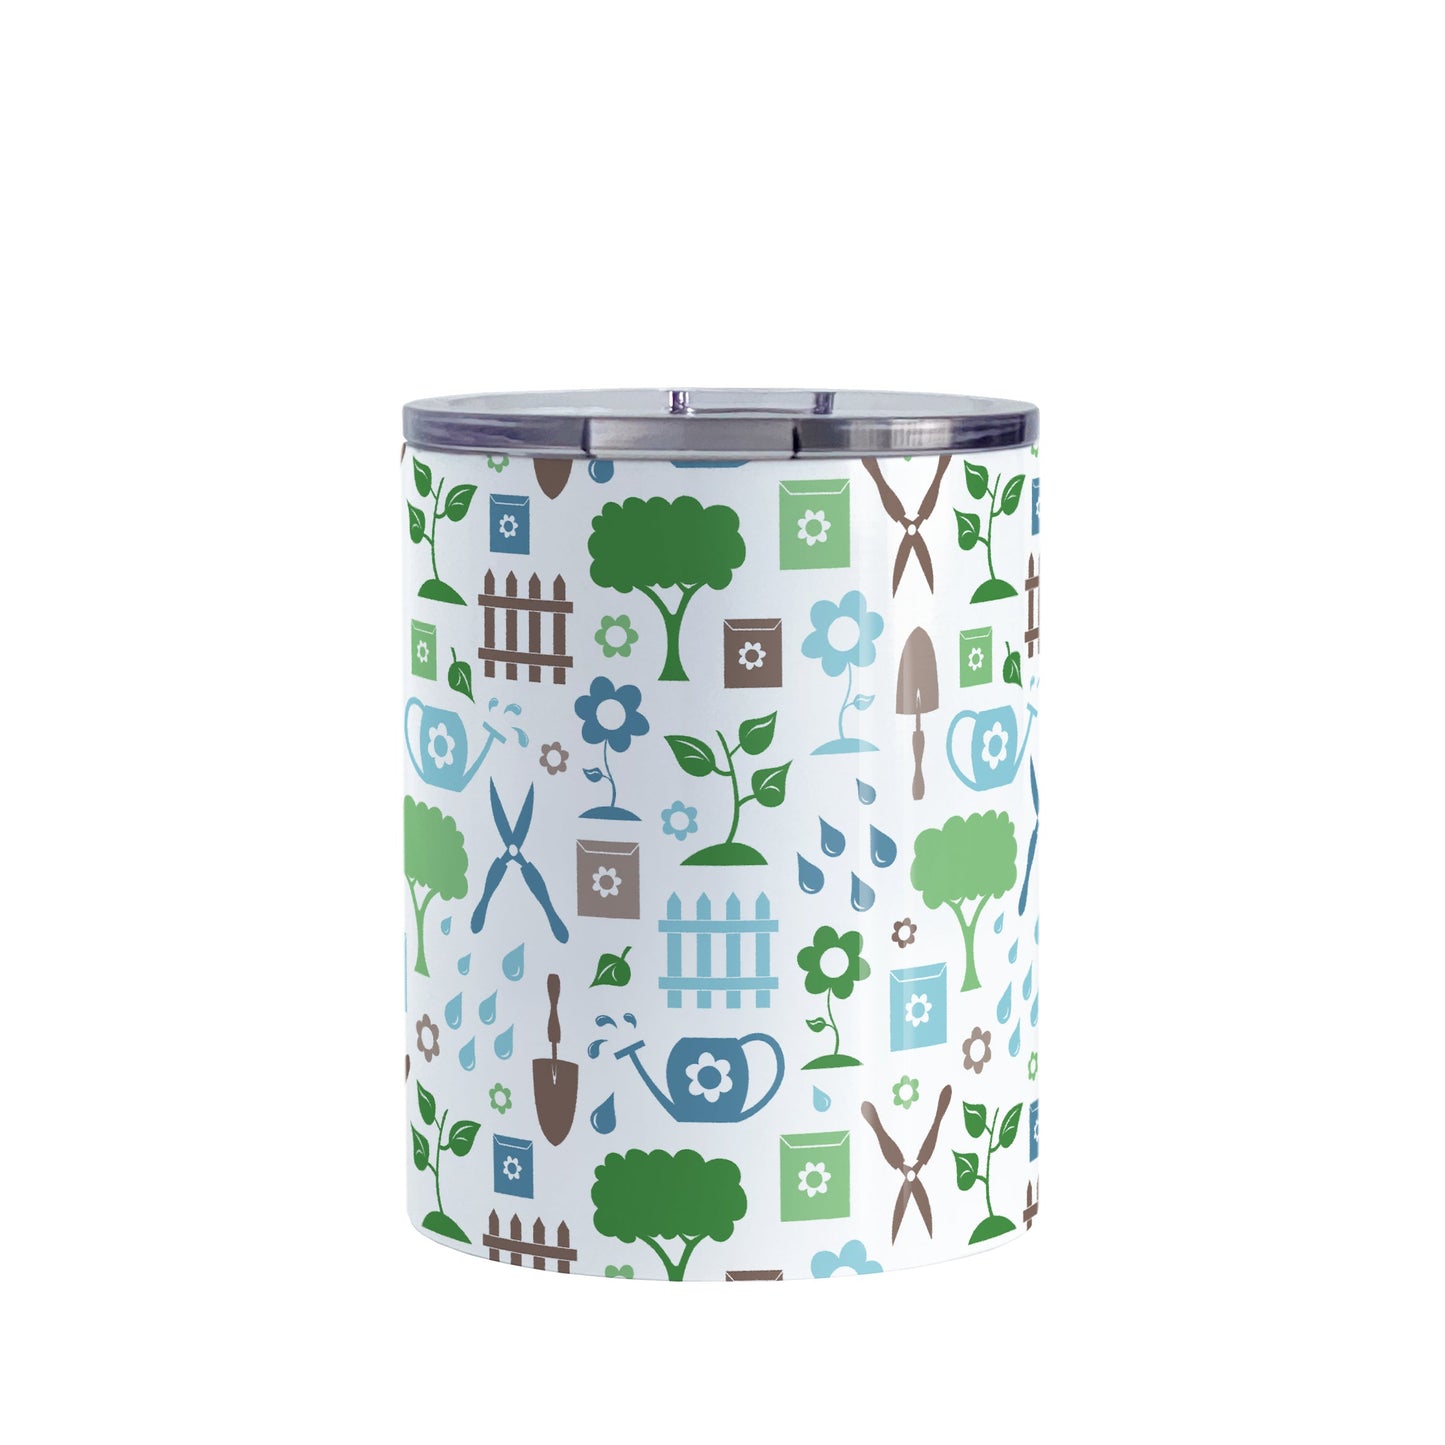 Gardening Pattern Tumbler Cup (10oz) at Amy's Coffee Mugs. A stainless steel insulated tumbler cup designed with a gardening pattern with trees, plants, flowers, seed packets, watering cans, fences, and gardening tools in blue, green, and brown.